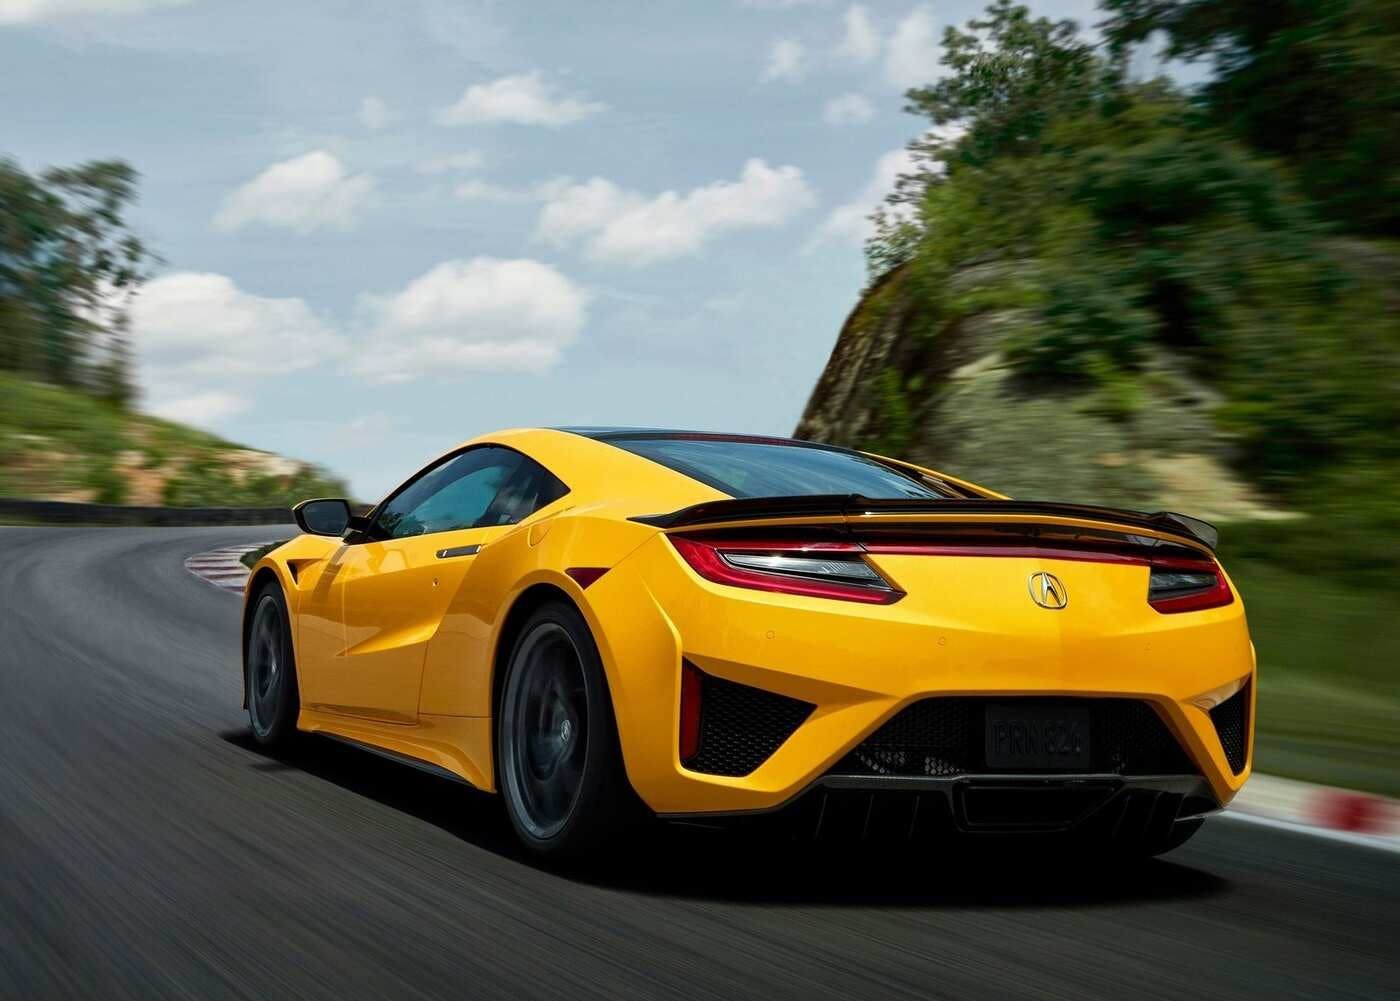 Indy Yellow Pearl Acura NSX speeding on the track